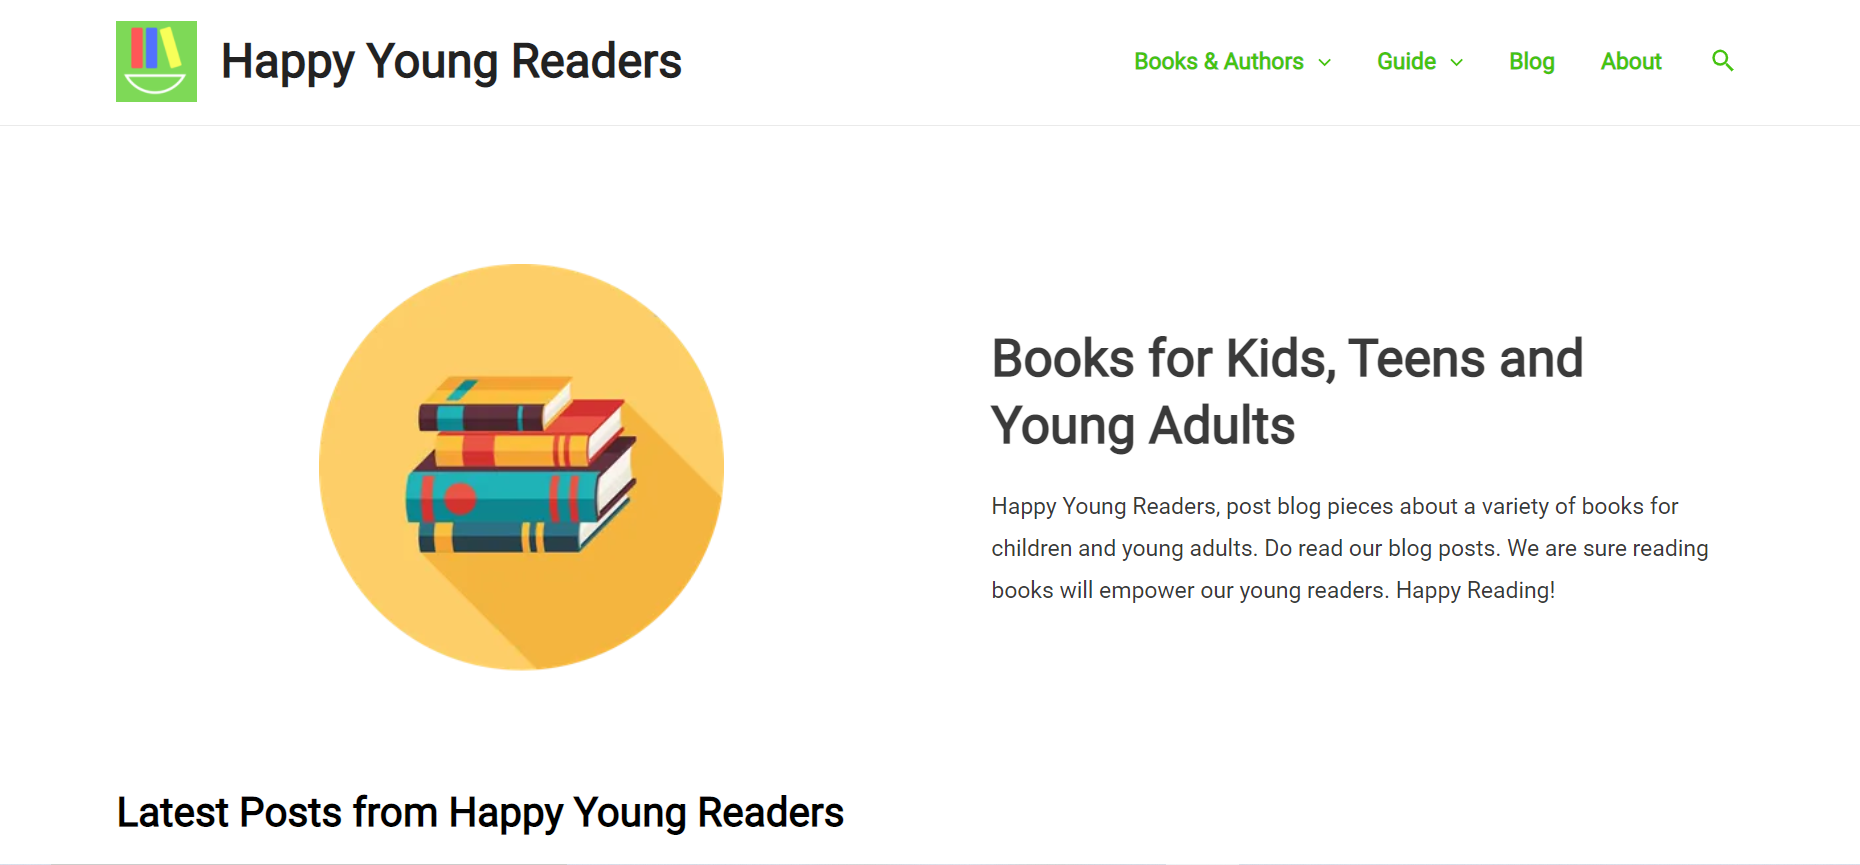 Happy Young Readers